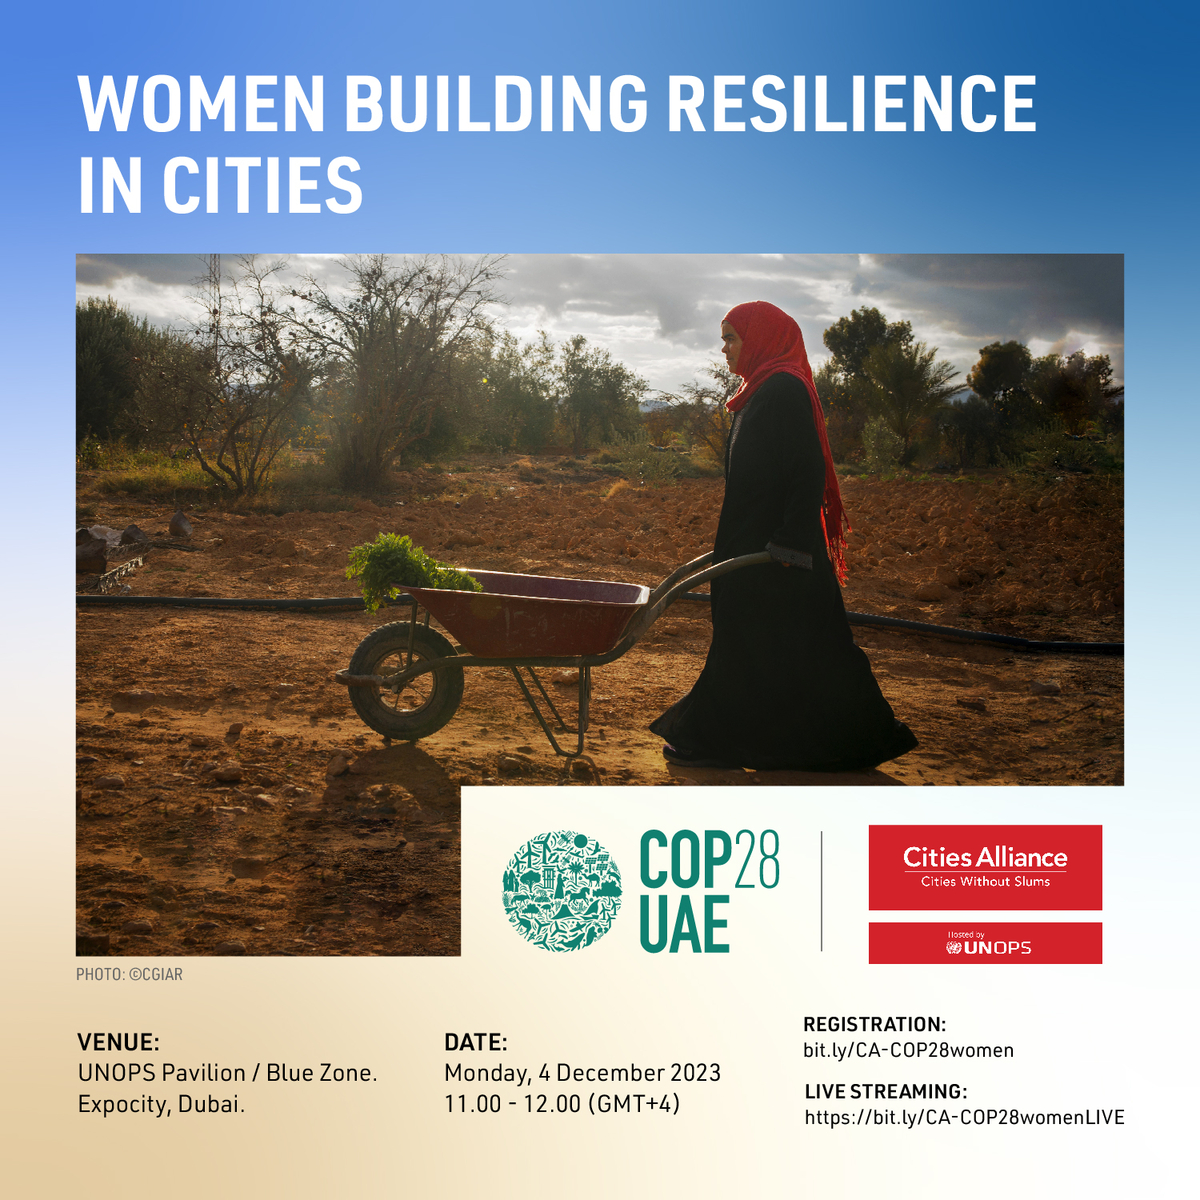 Women Building Resilience in Cities Flyer. Woman in Tunisia. Photo: CGIAR